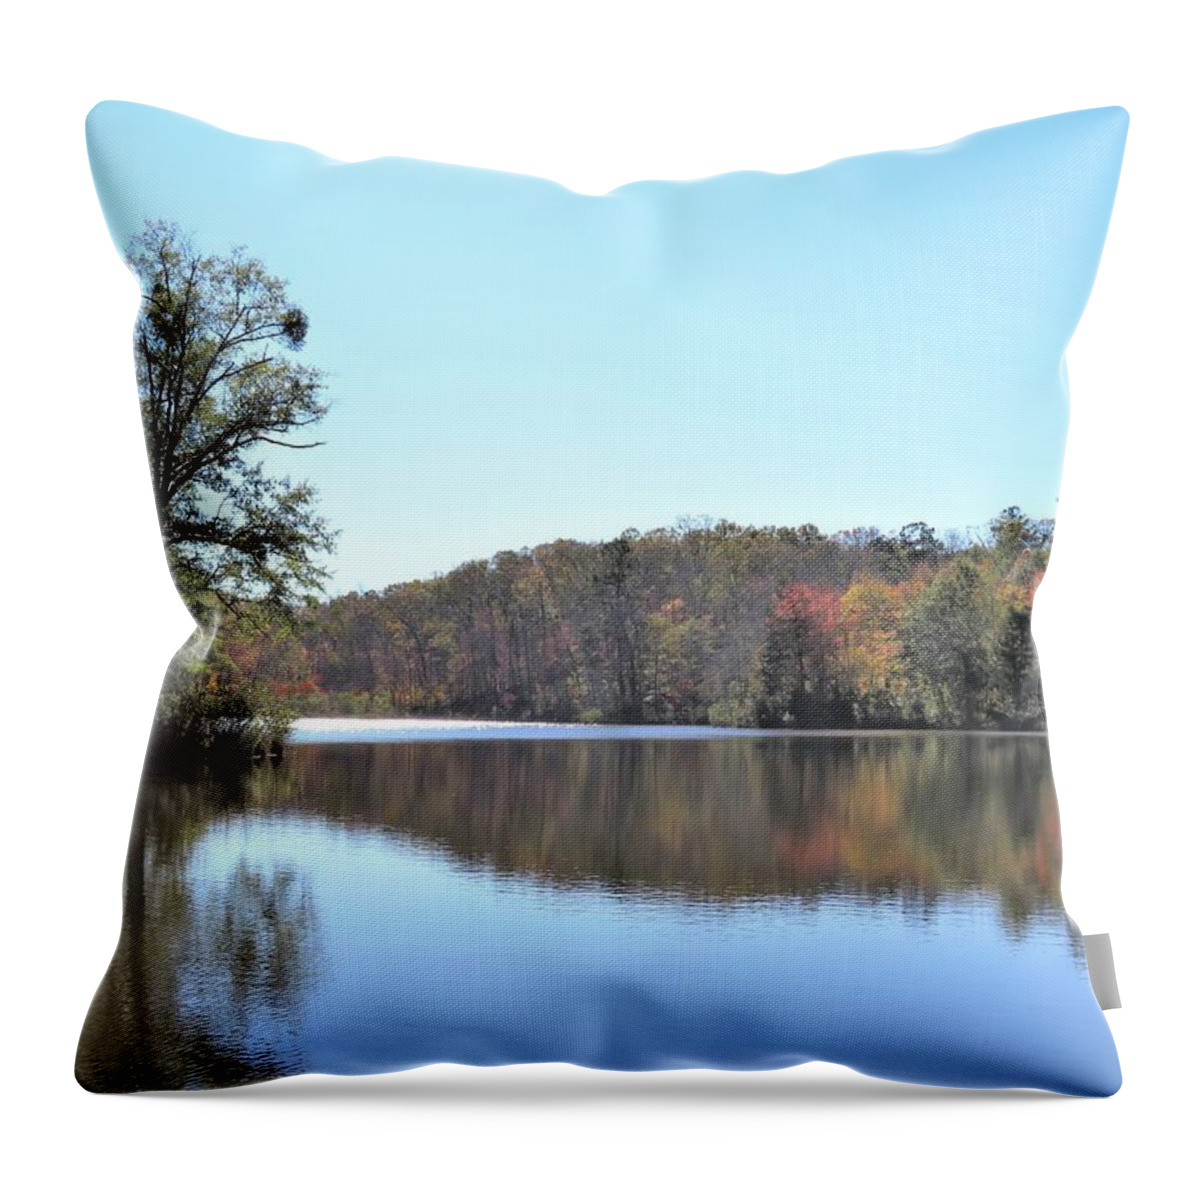 Pond Throw Pillow featuring the photograph A Bright Fall Pond by Ed Williams